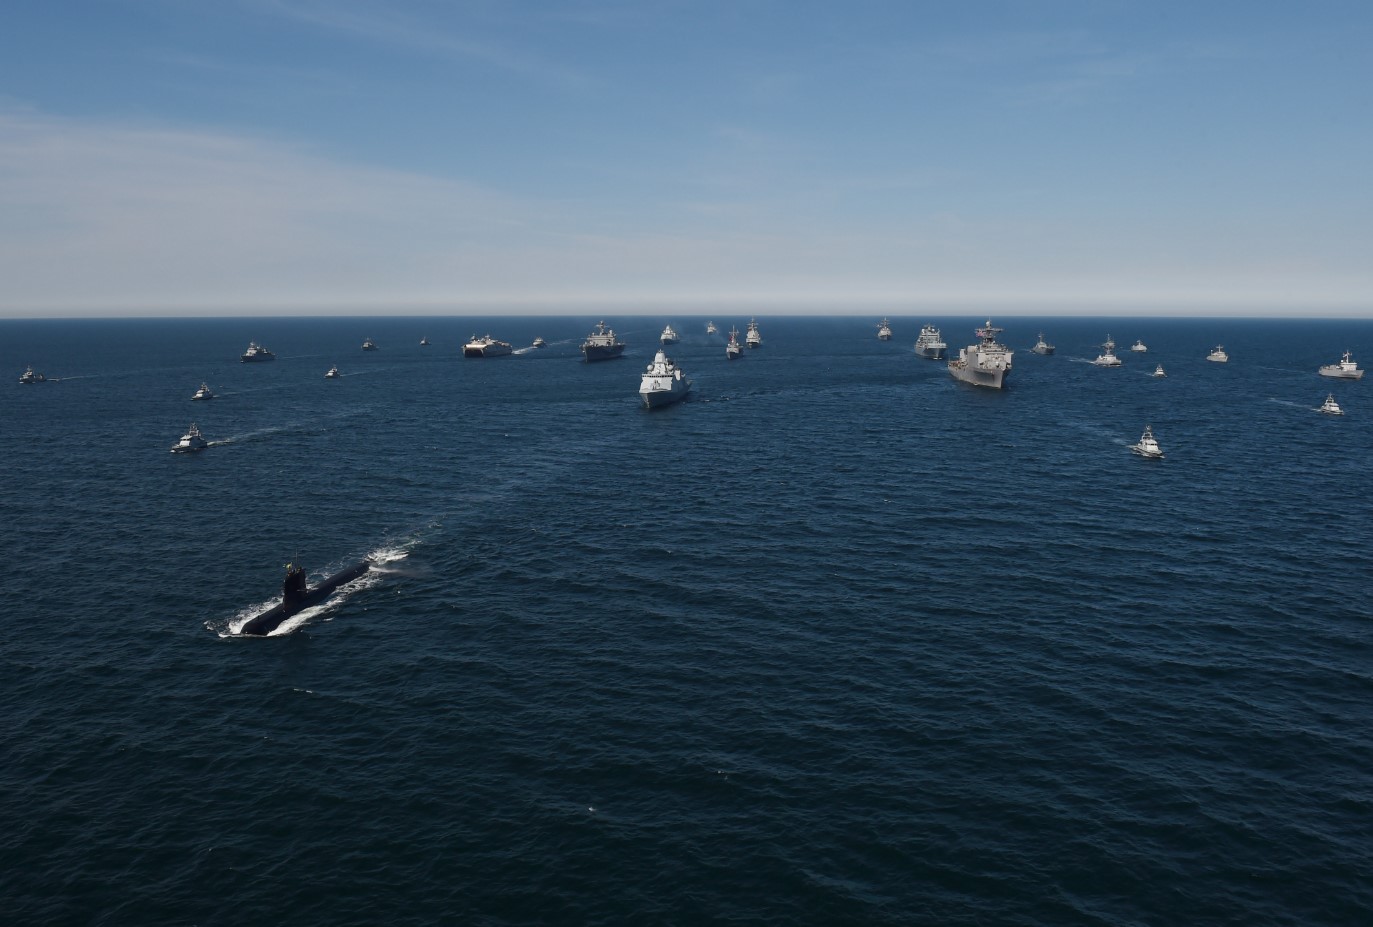 BALTOPS (Baltic Operations) Exercise